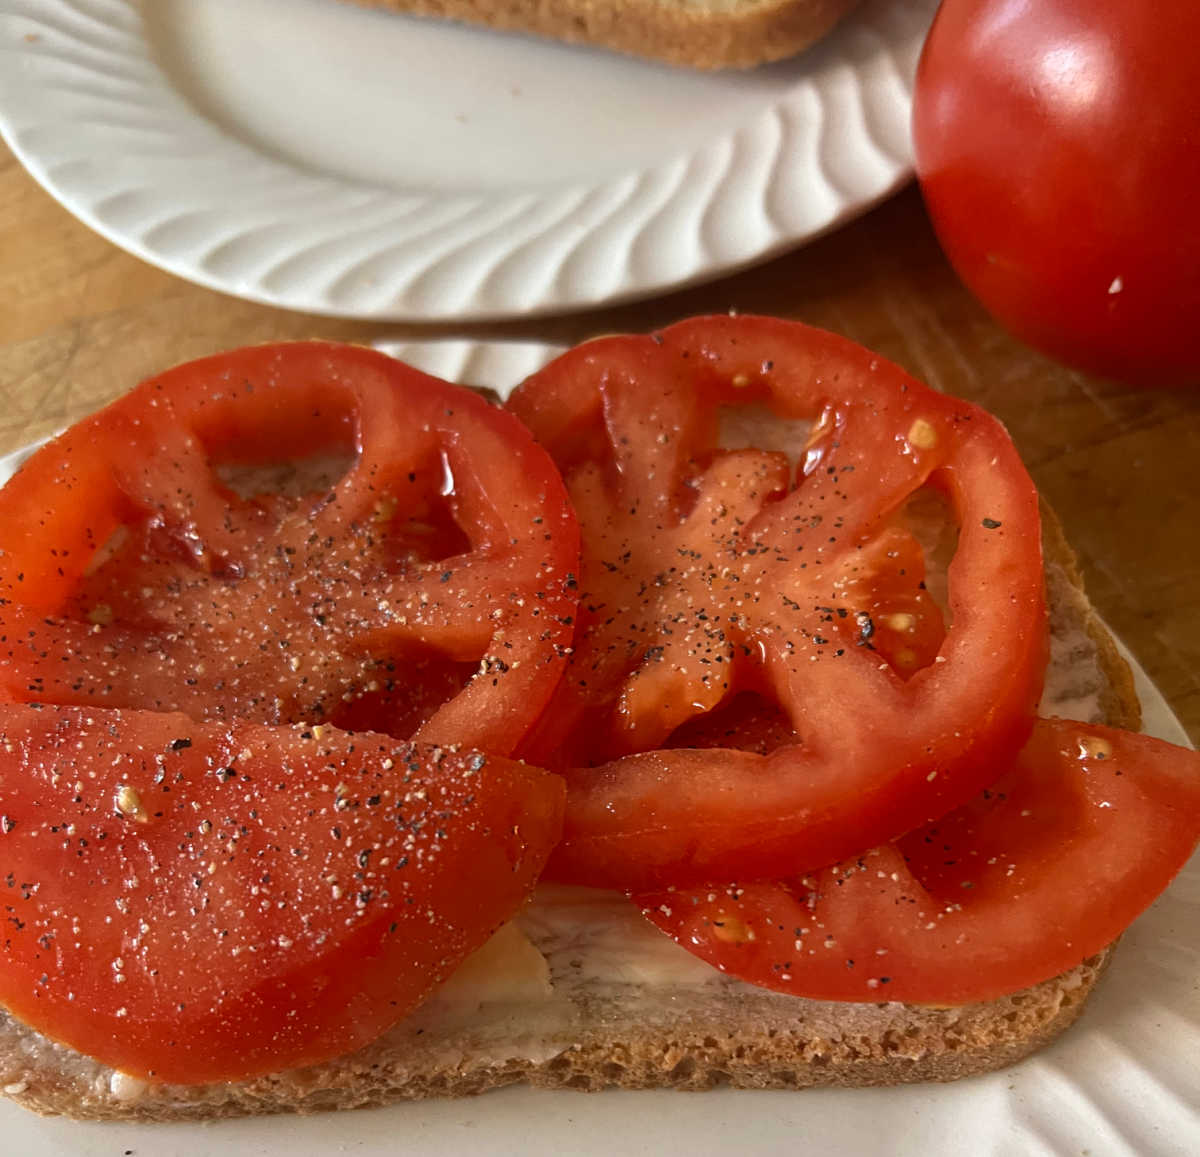 tomato slices with salt and pepper on rye bread